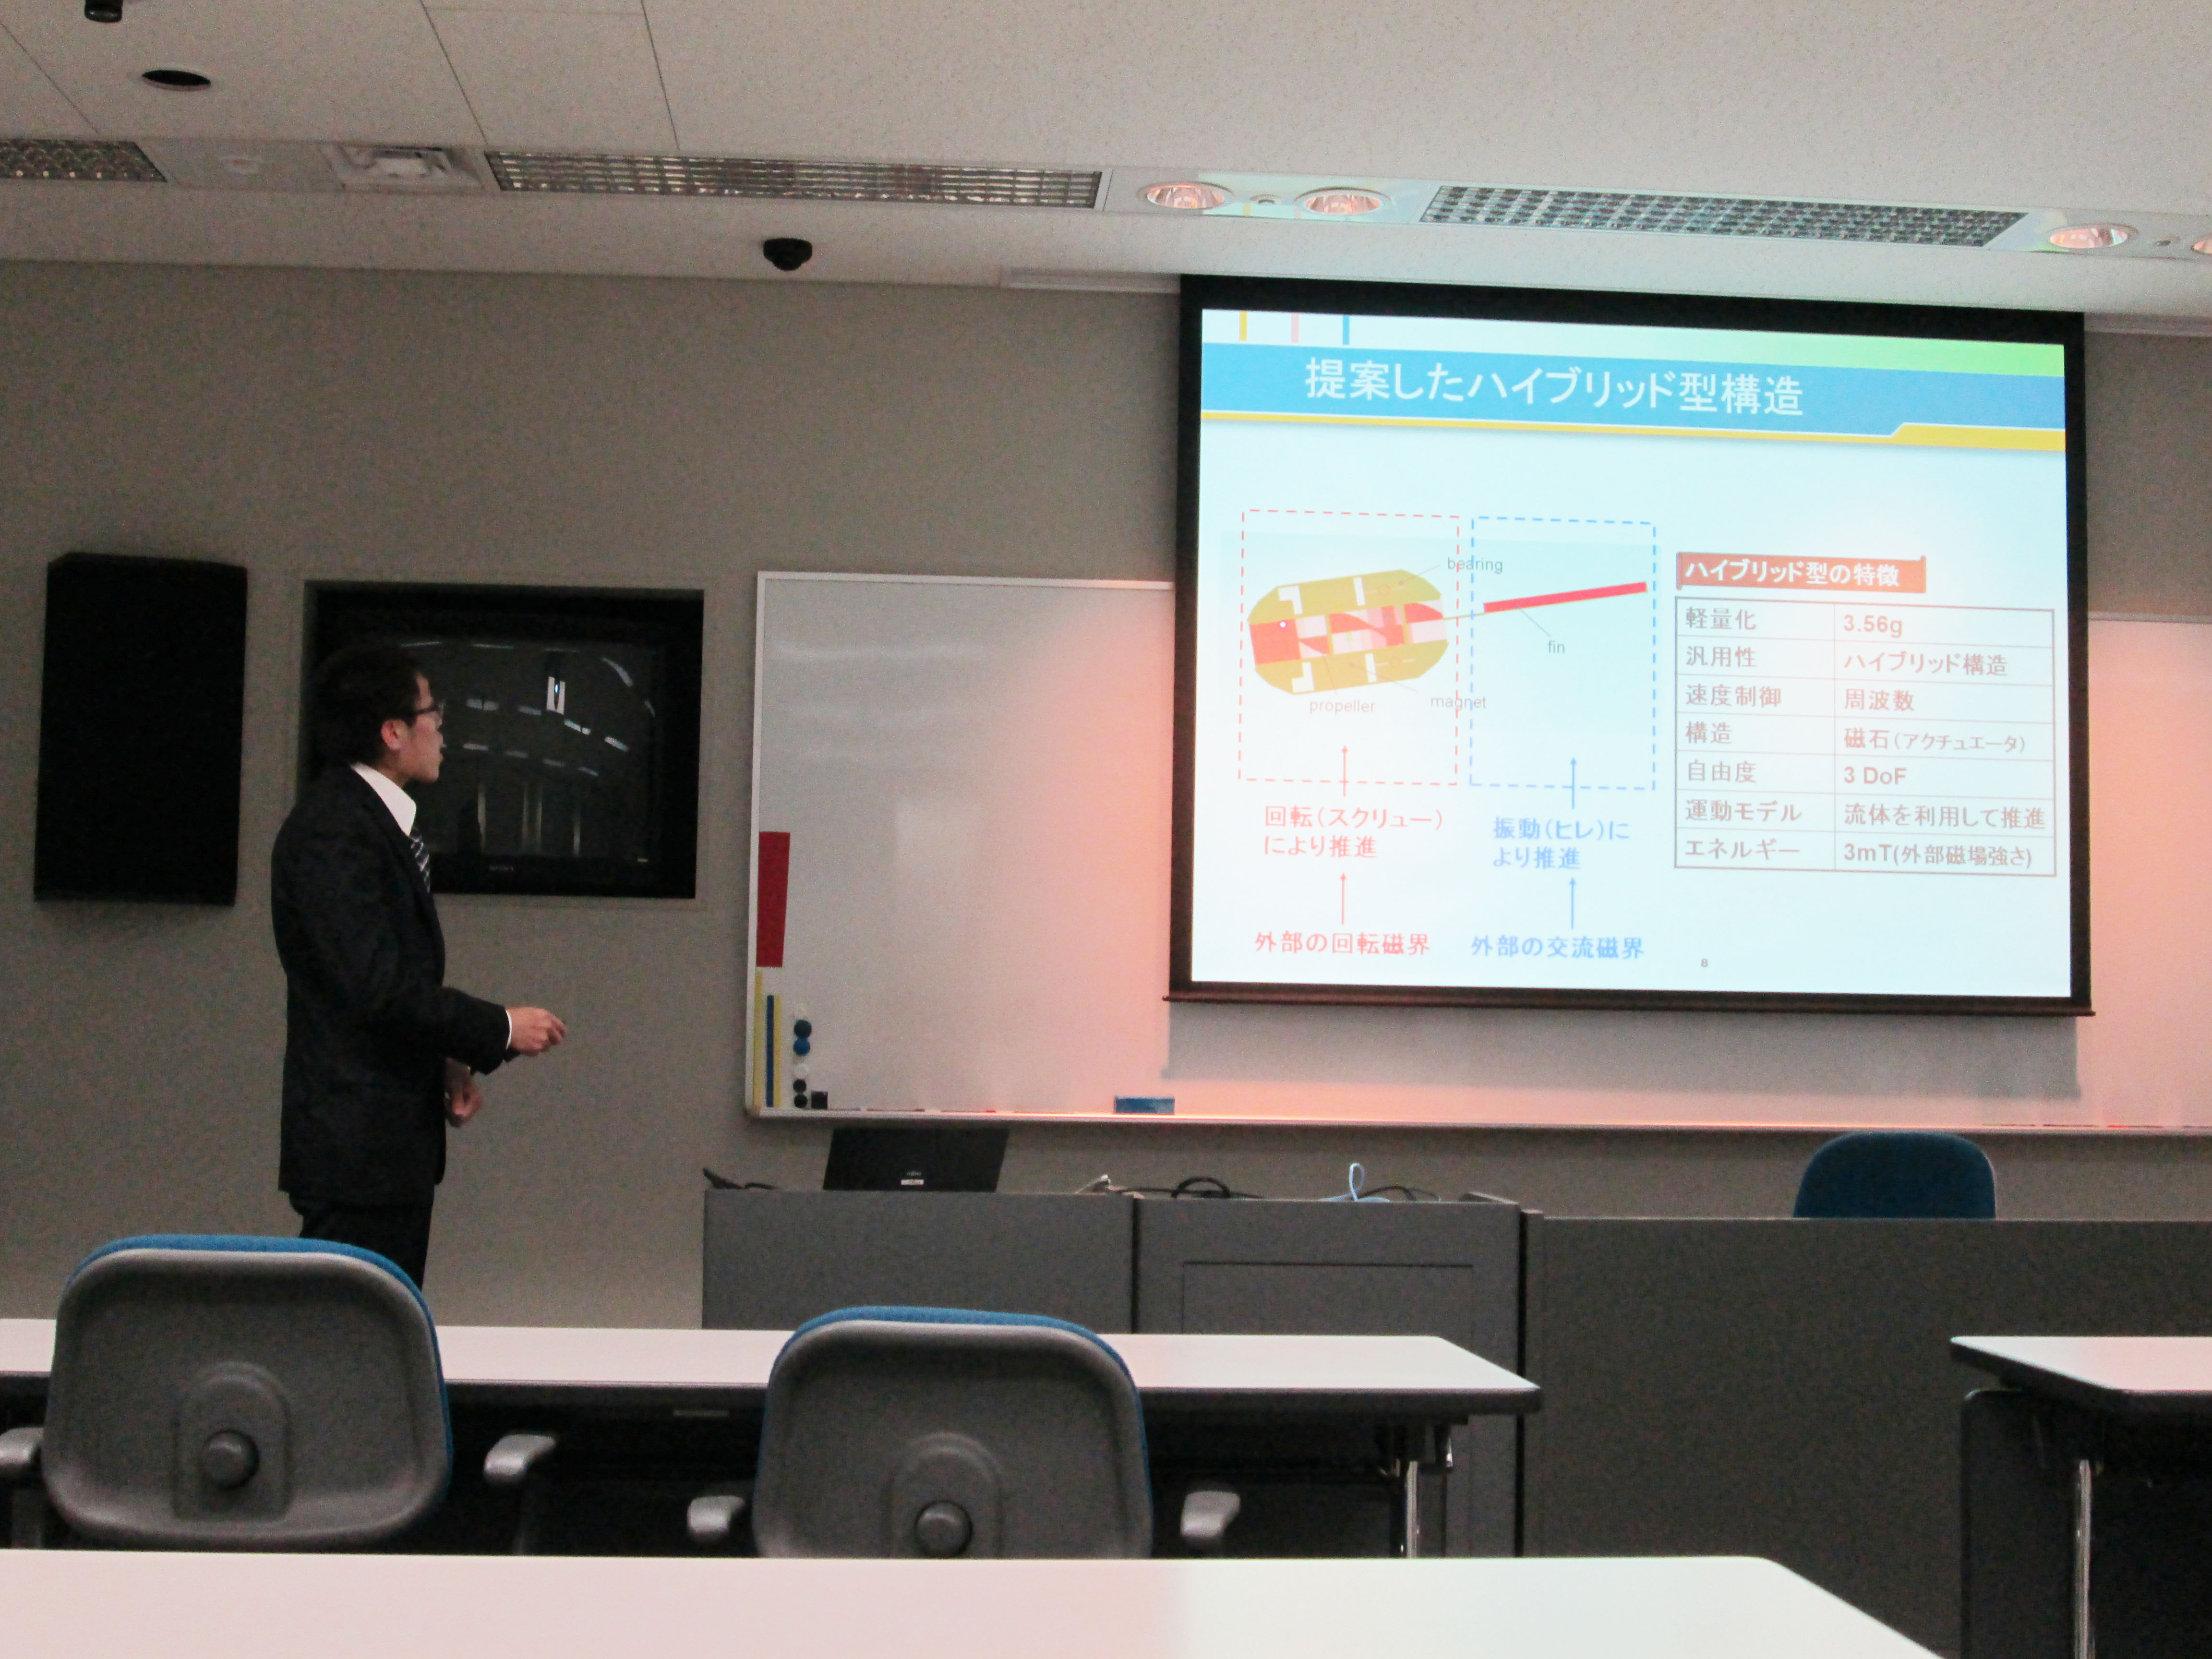 A Special Lecture Held by Prof. Guo